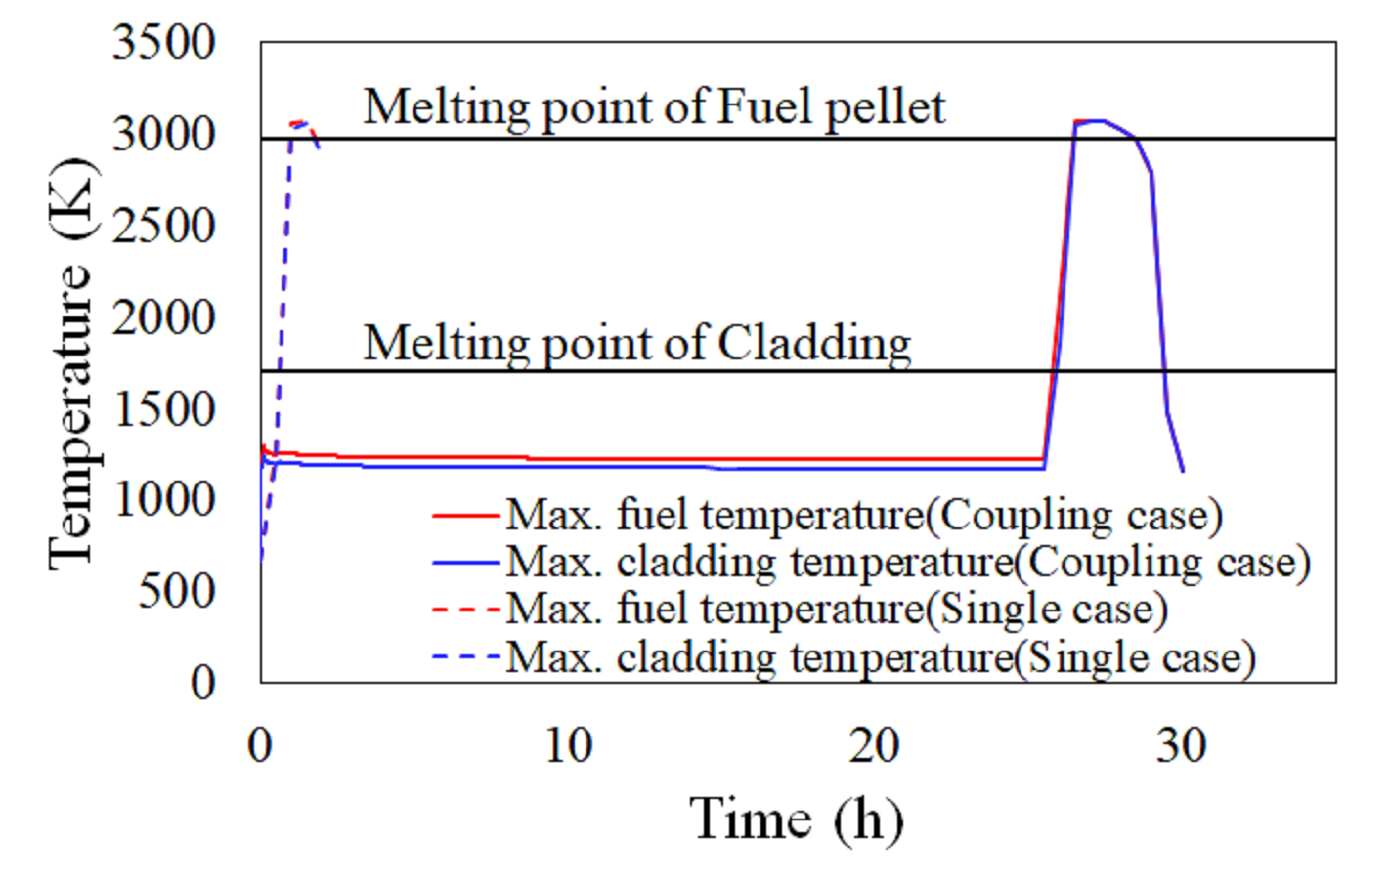 Figure 5: Comparison of fuel and cladding temperatures in LOHS (coupling case: solid line; single case: dot line). (© Elsevier)